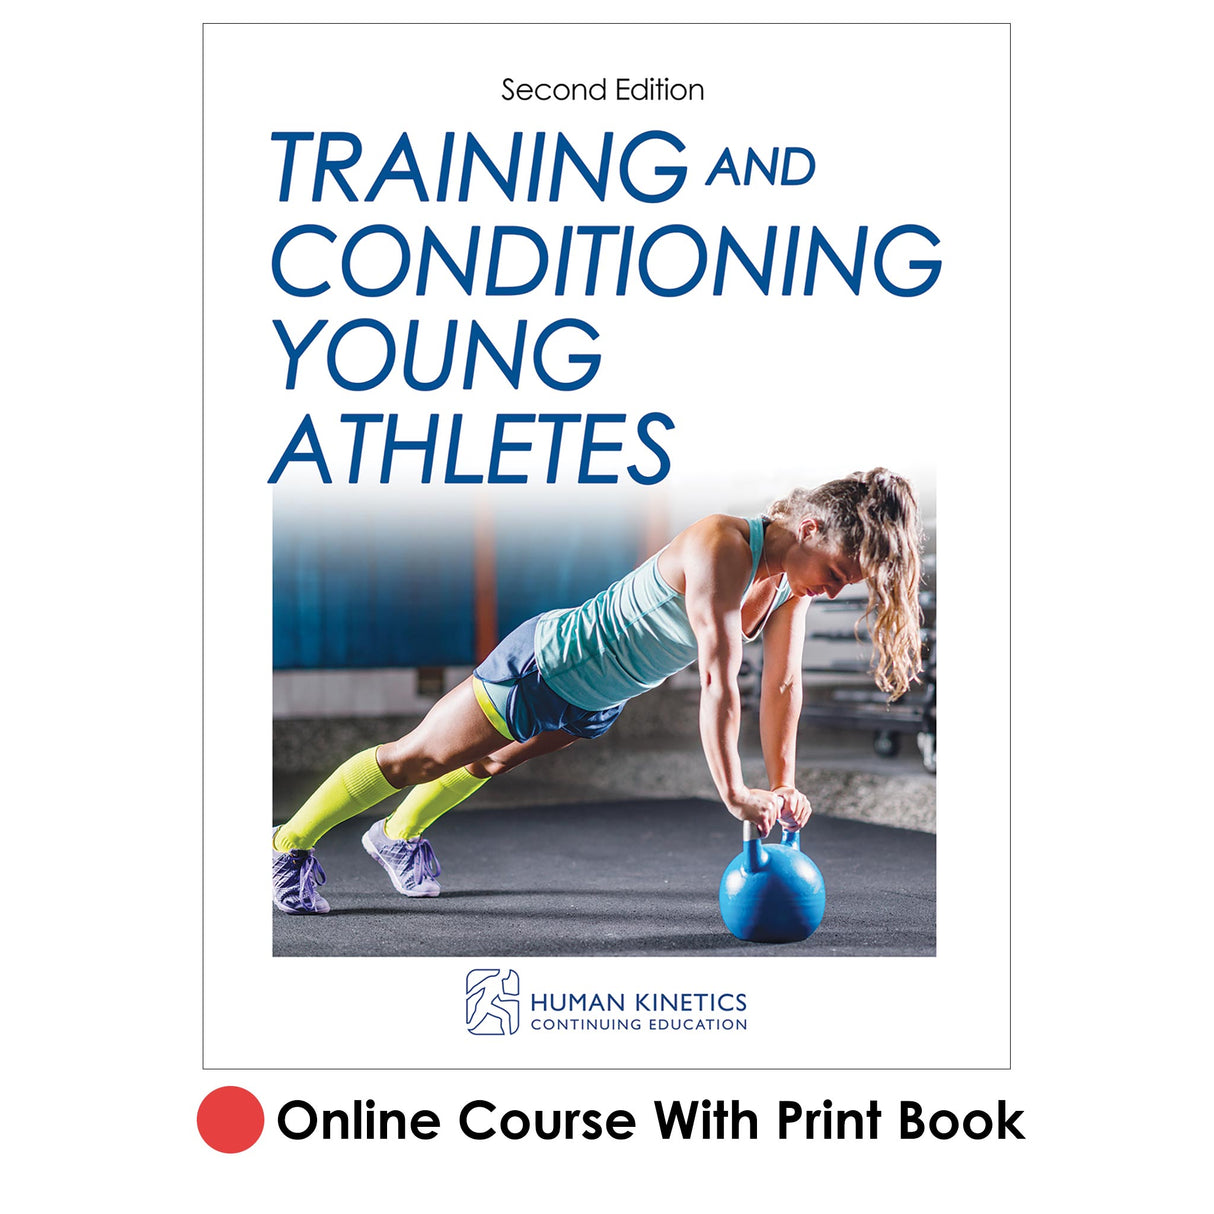 Training and Conditioning Young Athletes 2nd Edition Online CE Course With Print Book